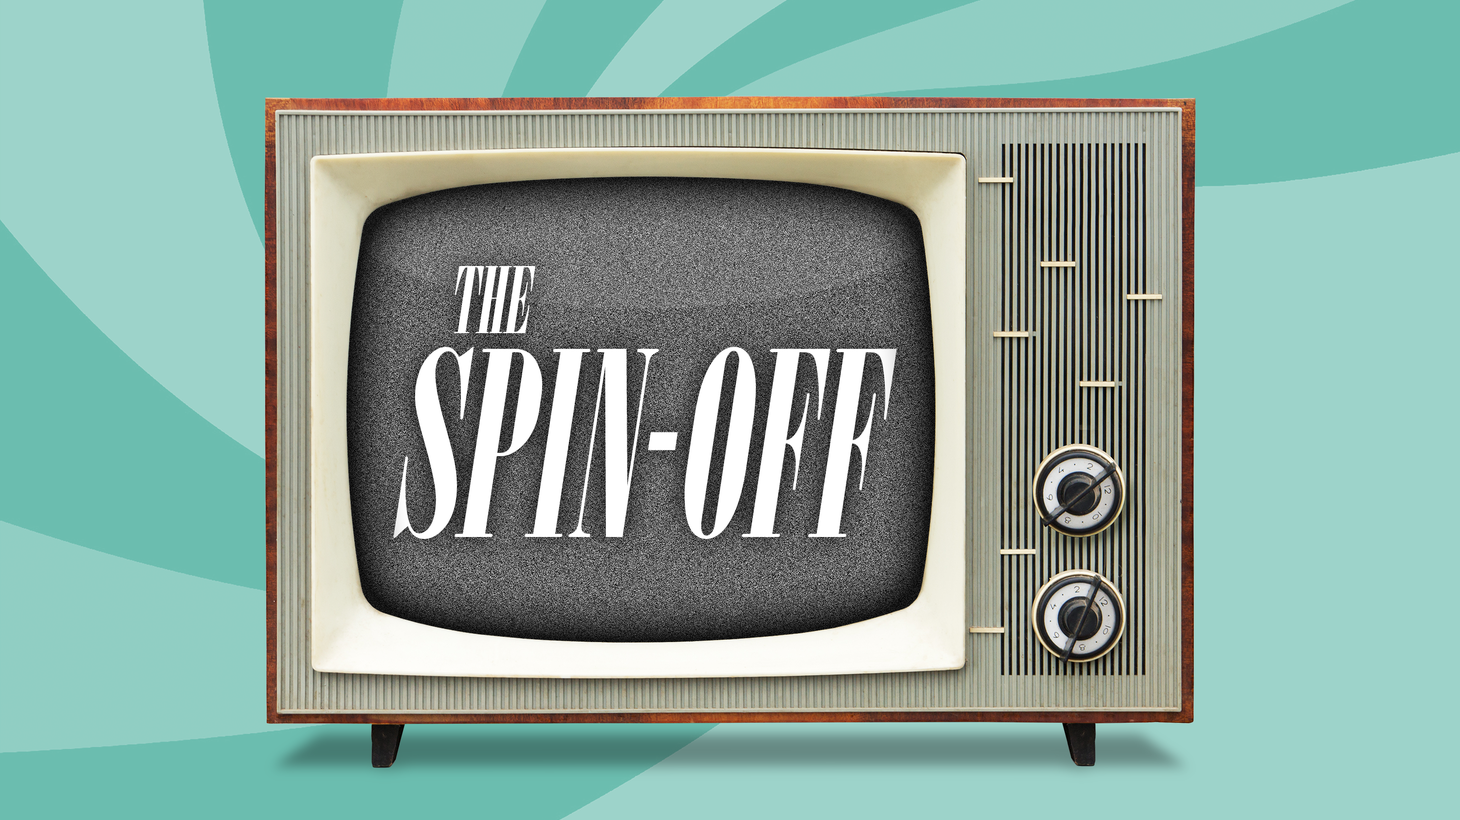 In this bonus episode of The Spin-off, we share the recent TV Guide showrunners panel discussion from Wondercon. Spin-off host Michael Schneider moderates.